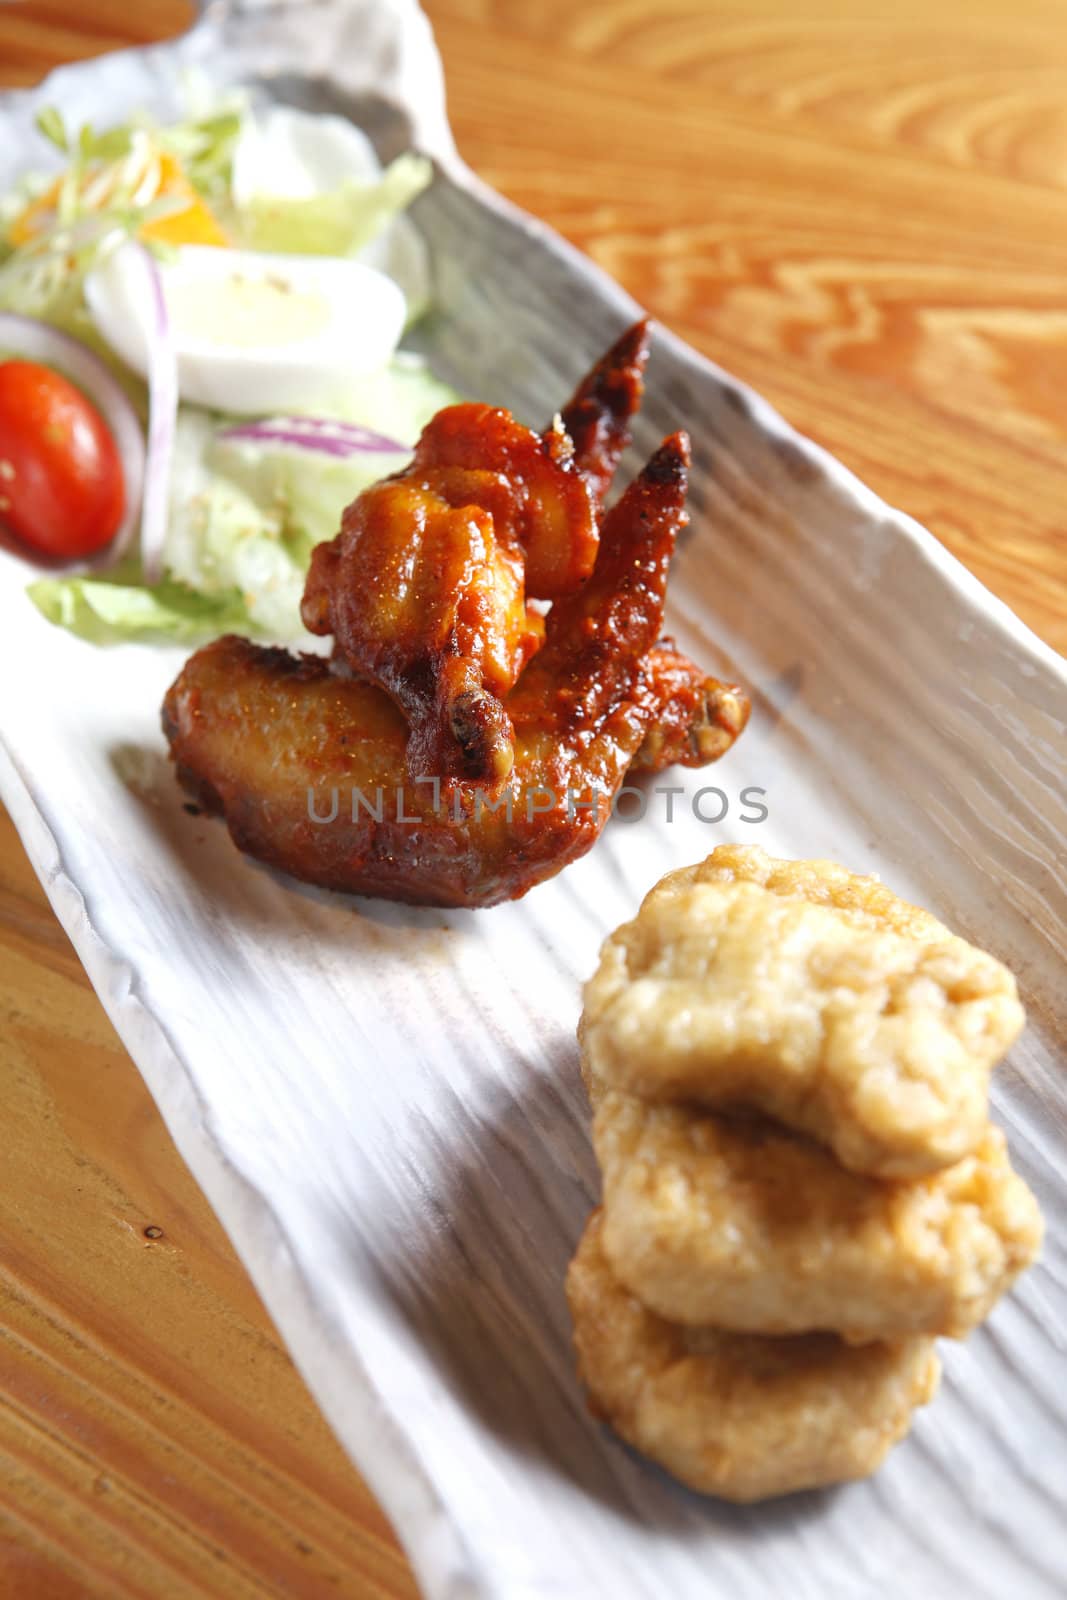 Appetizer include chicken wing, nugget and salad.